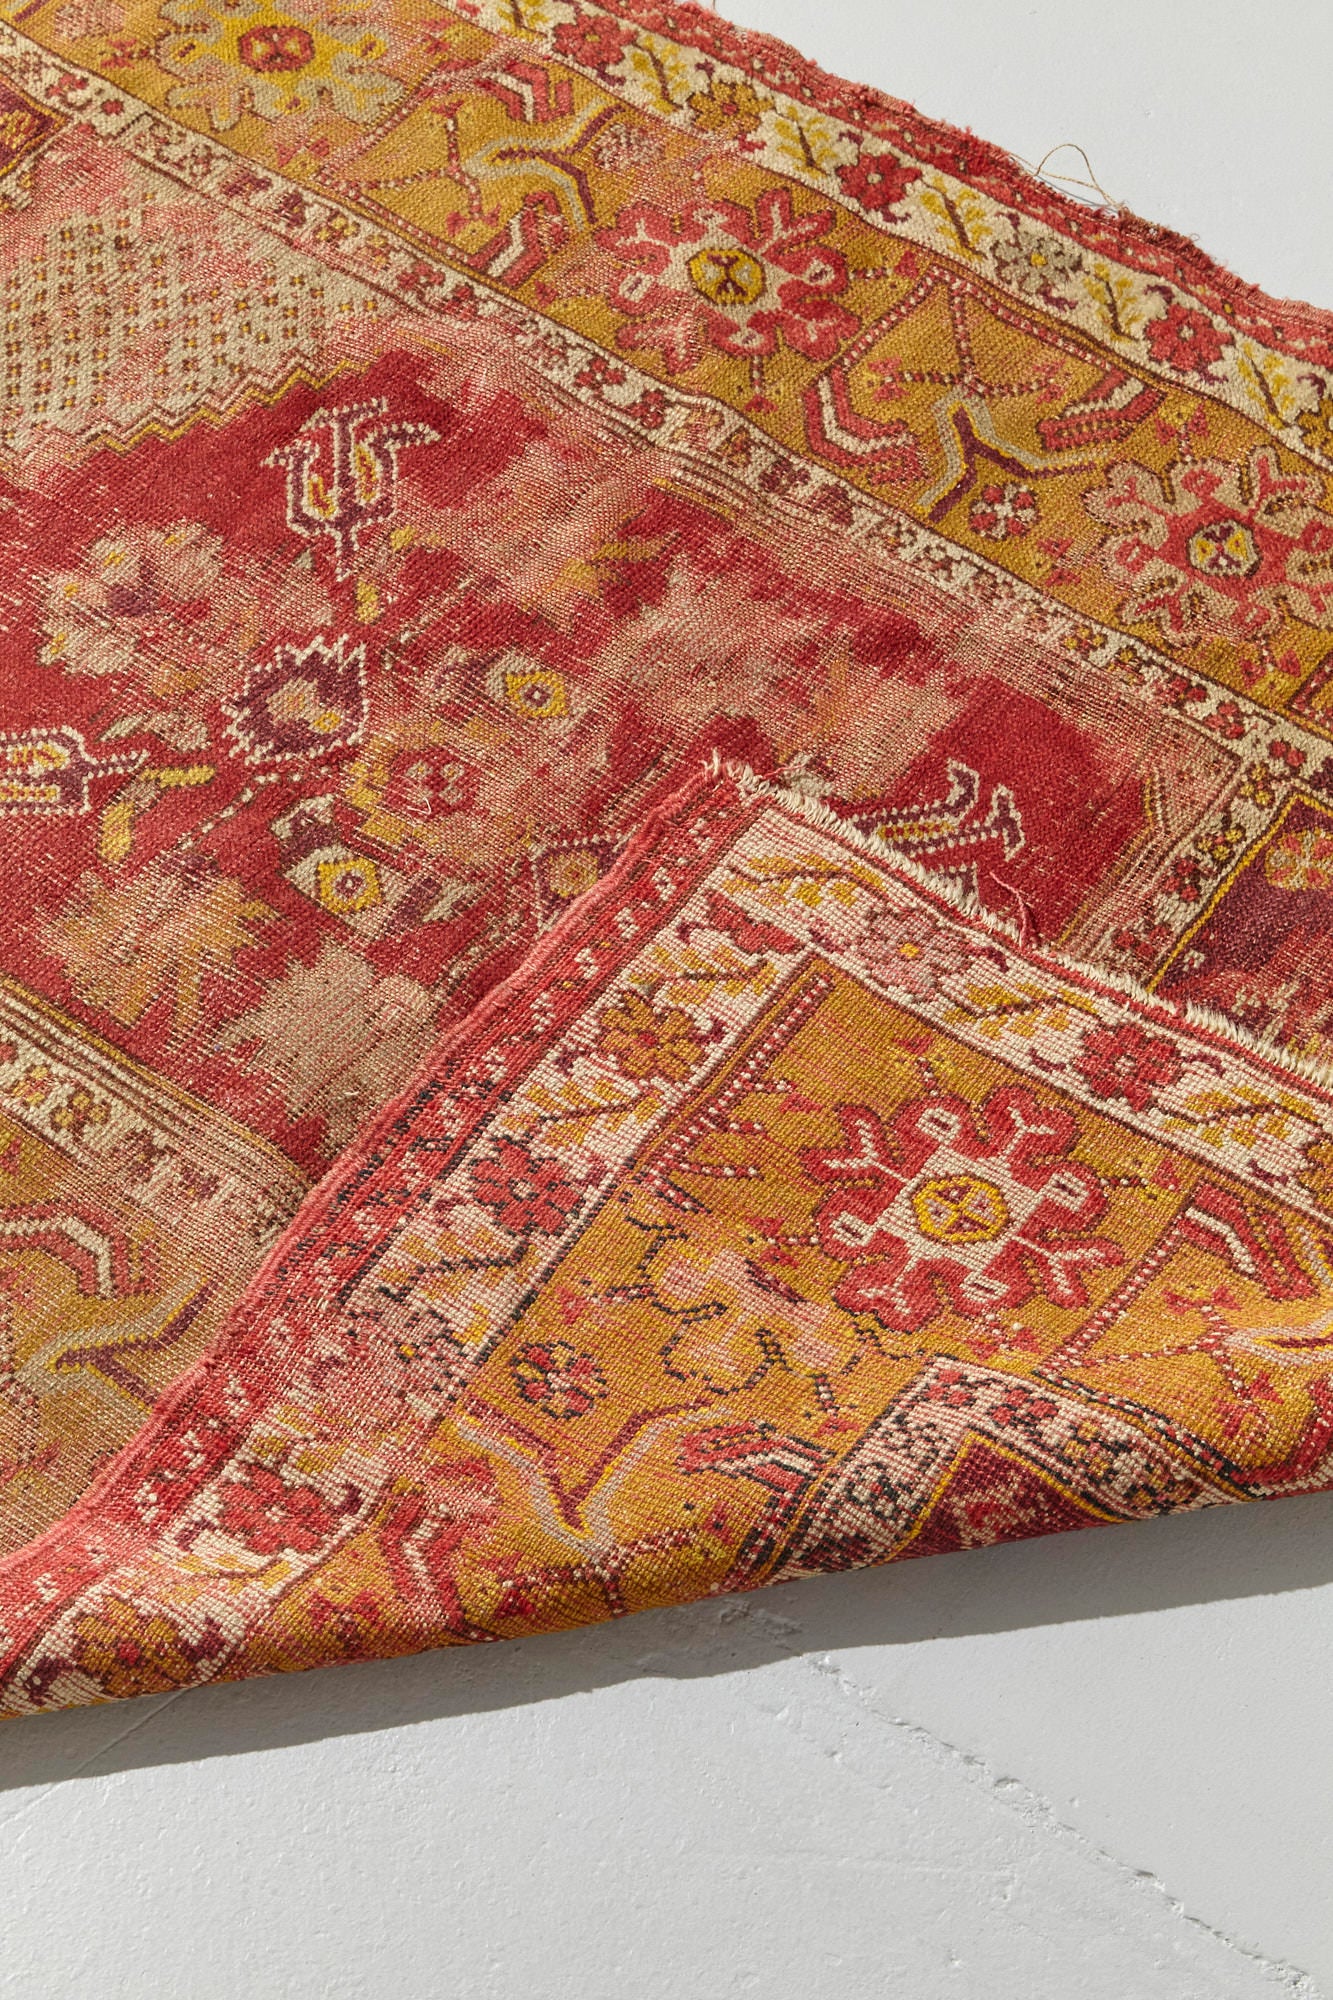 Antique Turkish Prayer Rug, hand woven in red and gold, perfect for a bed room, study or kitchen rug - Available from King Kennedy Rugs Los Angeles